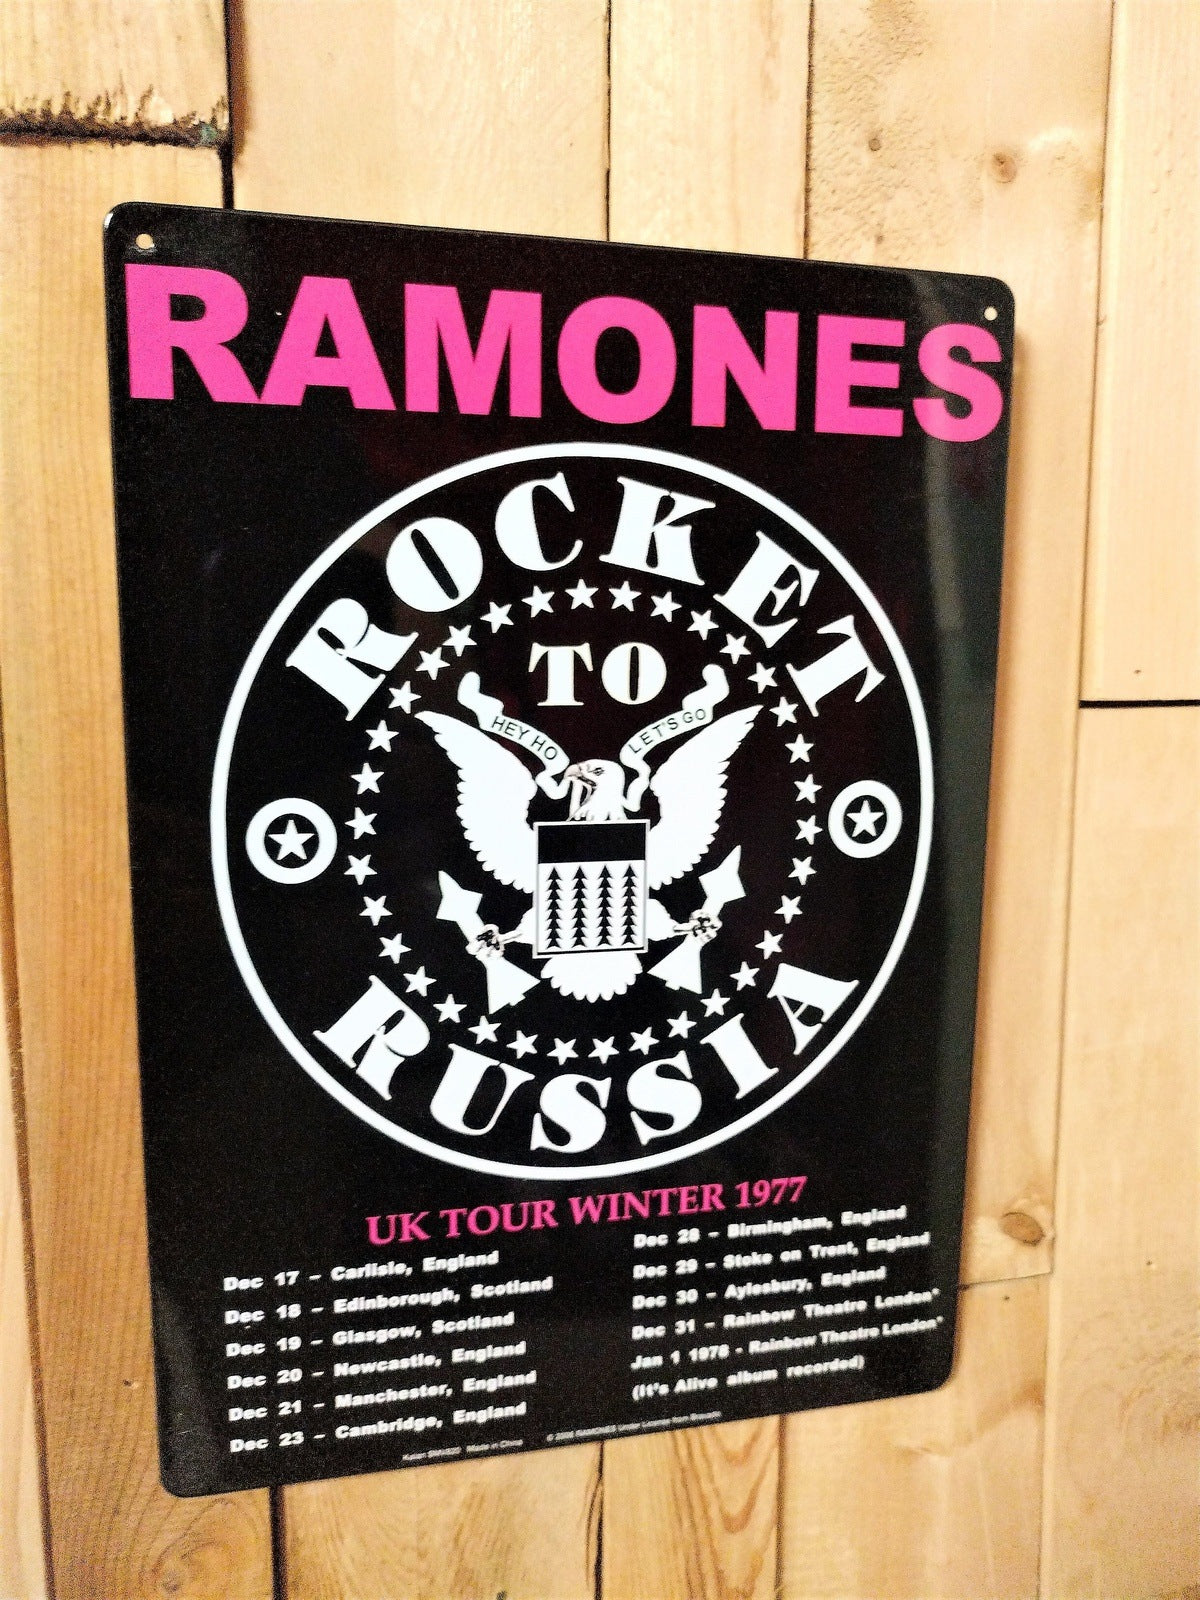 Ramones Rocket to Russia Tin Sign 8.25 inch X 11.5 inch